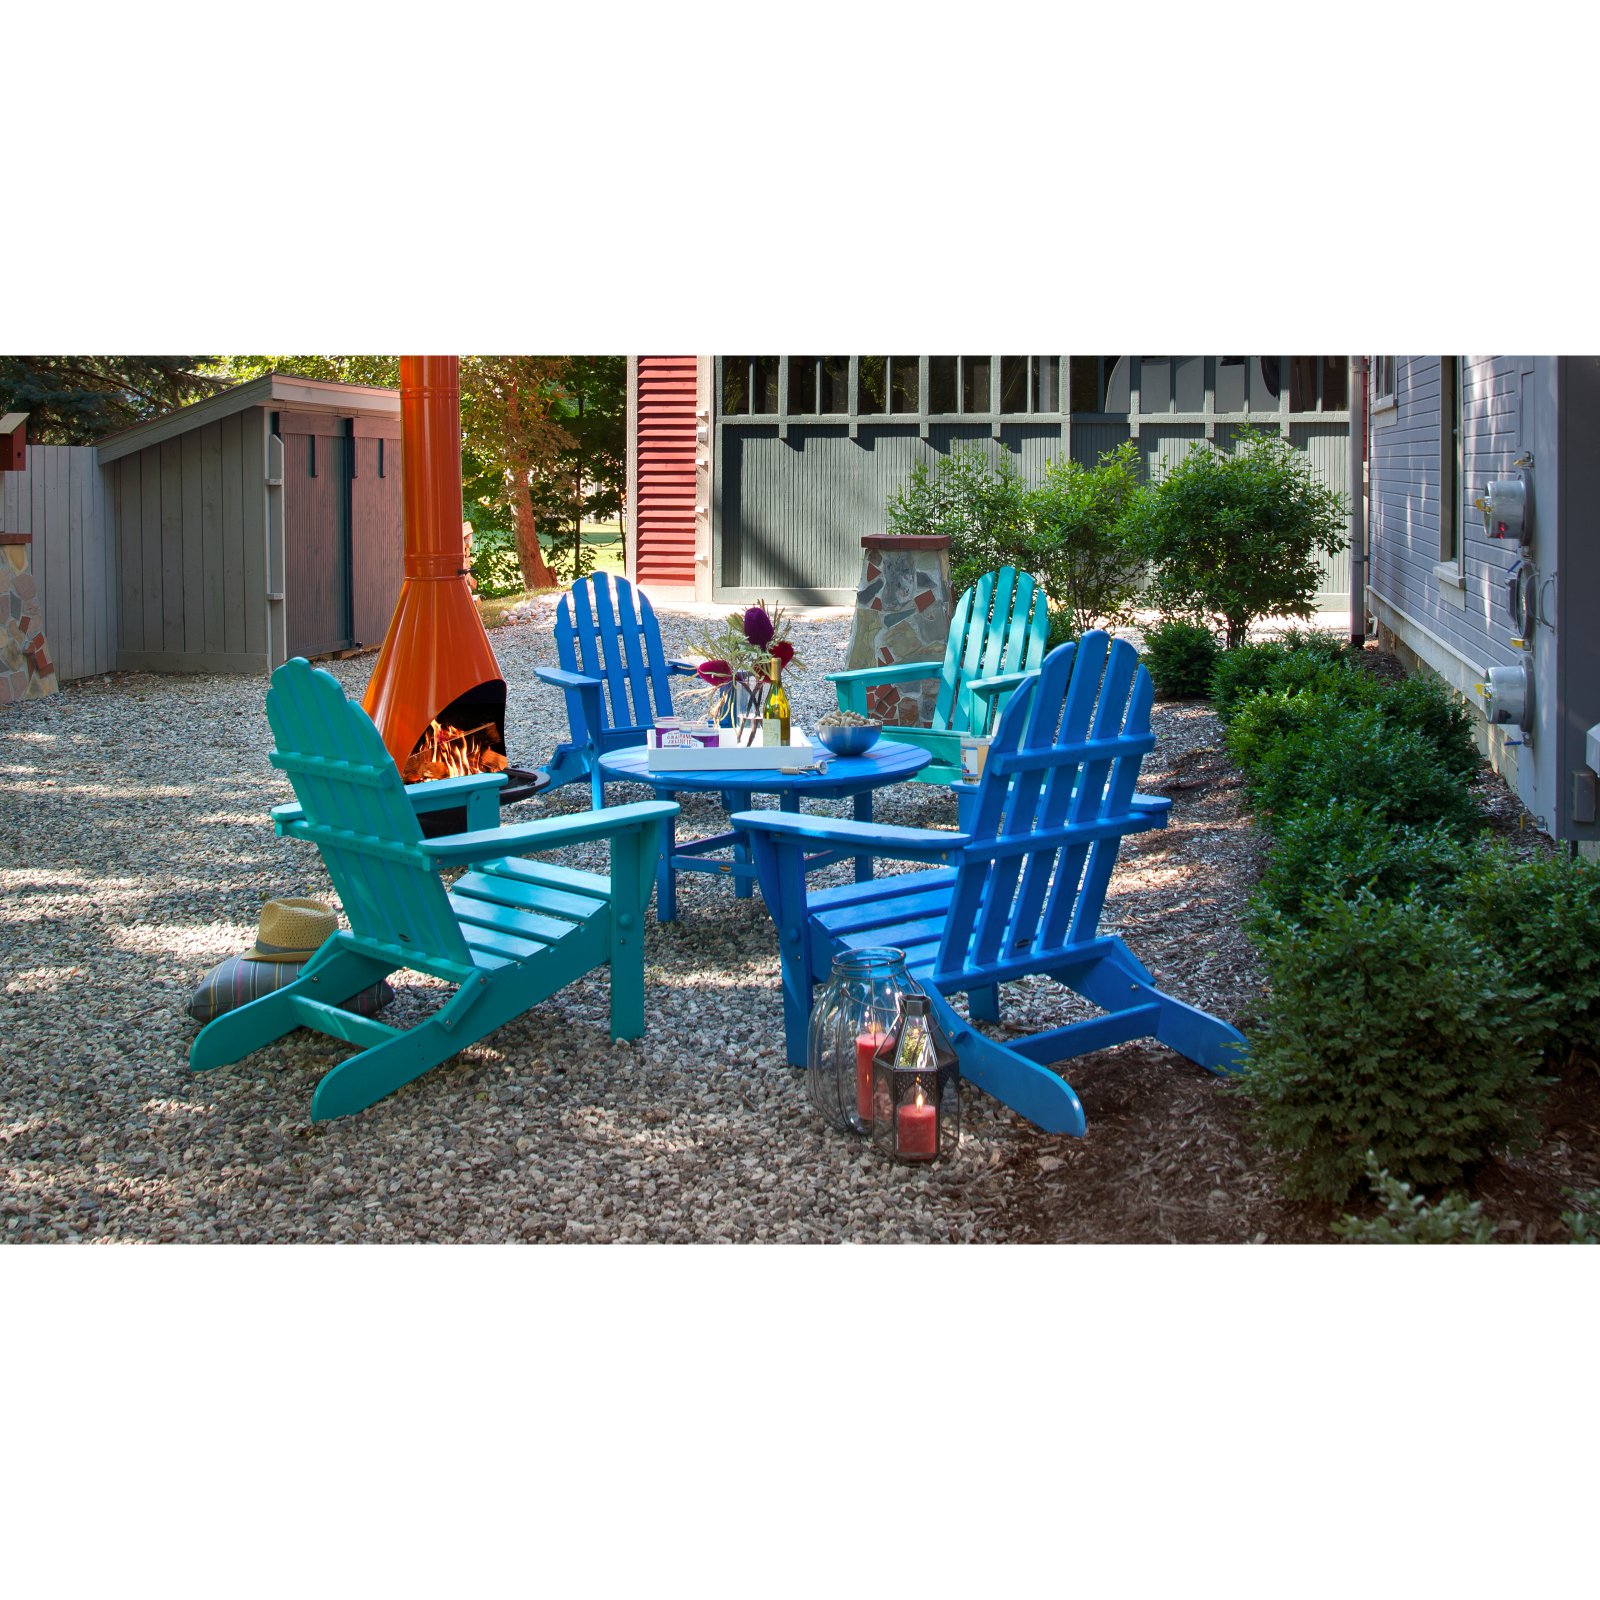 POLYWOOD&reg; Classic Recycled Plastic Foldable Adirondack Chair - image 2 of 11